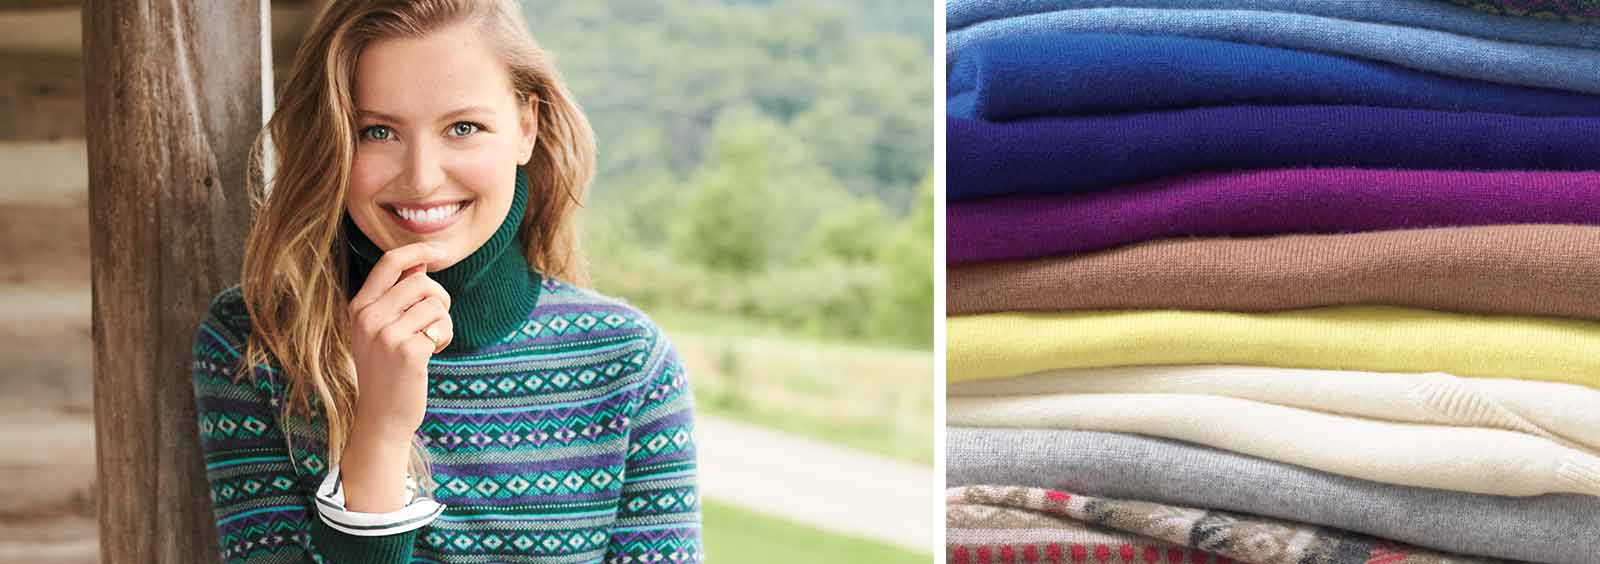 How To Wash and Care for Cashmere Sweater | Lands' End